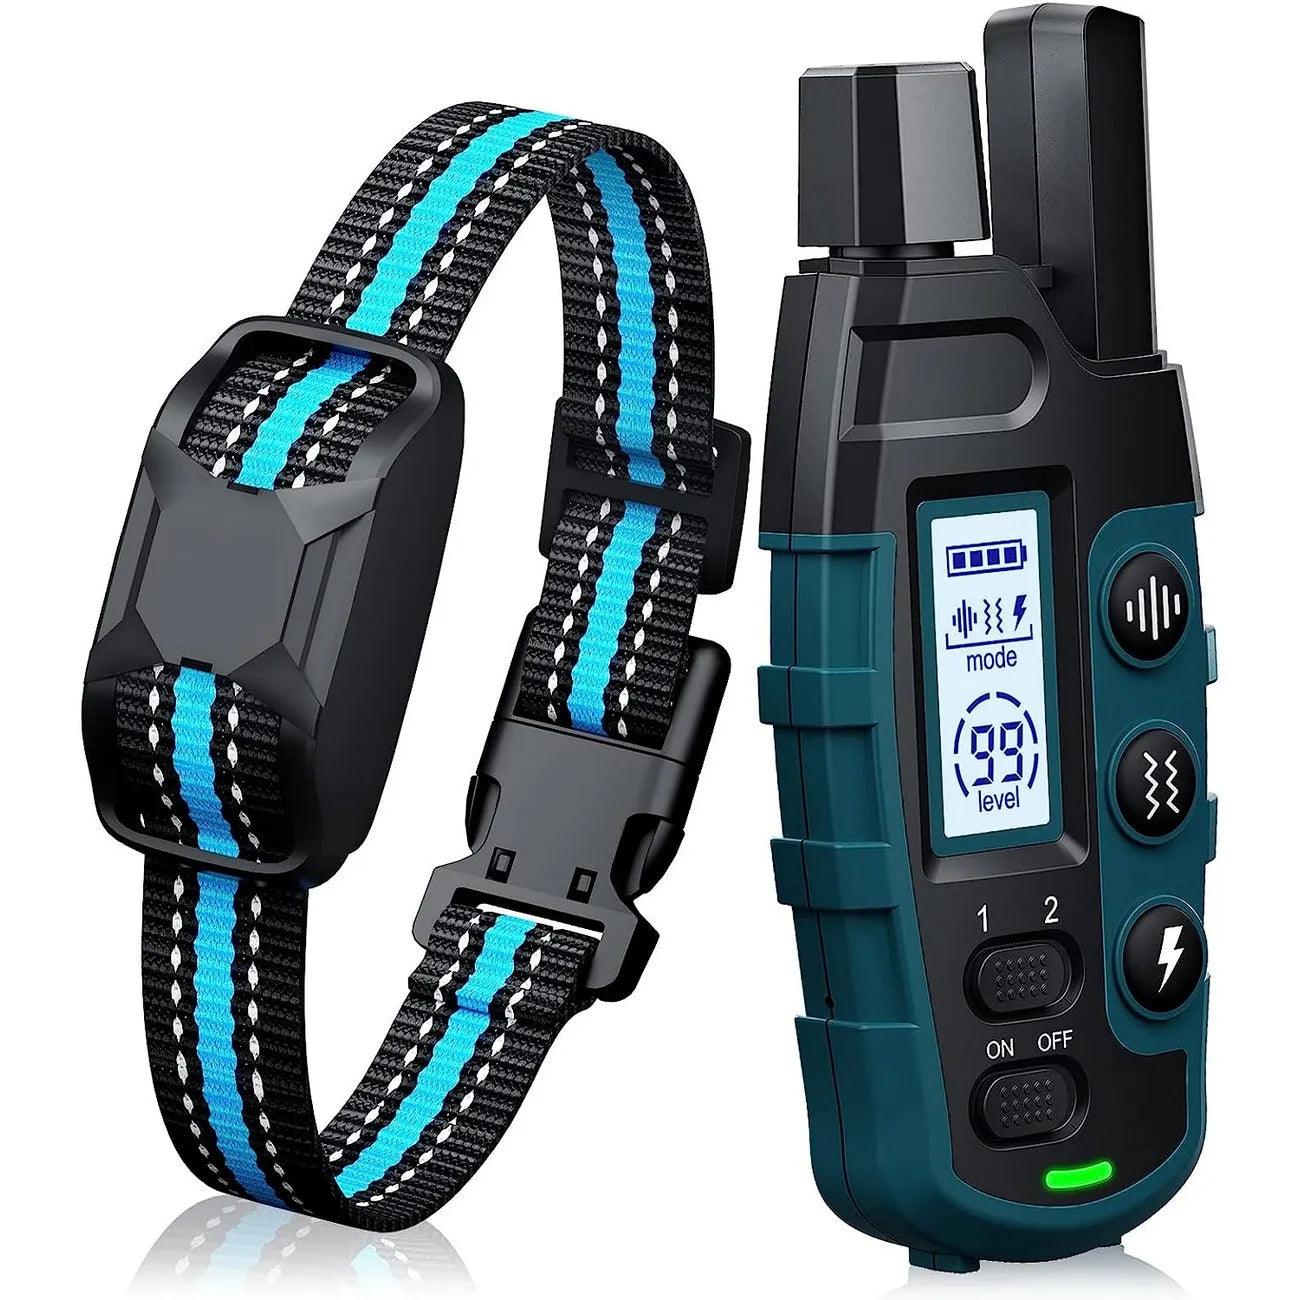 Advanced Remote Dog Training Collar for Effective 3300Ft Range Control with Beep Vibration Shock - Waterproof & Rechargeable Technology for High-Quality Pet Training  ourlum.com Blue For 1 Dog  